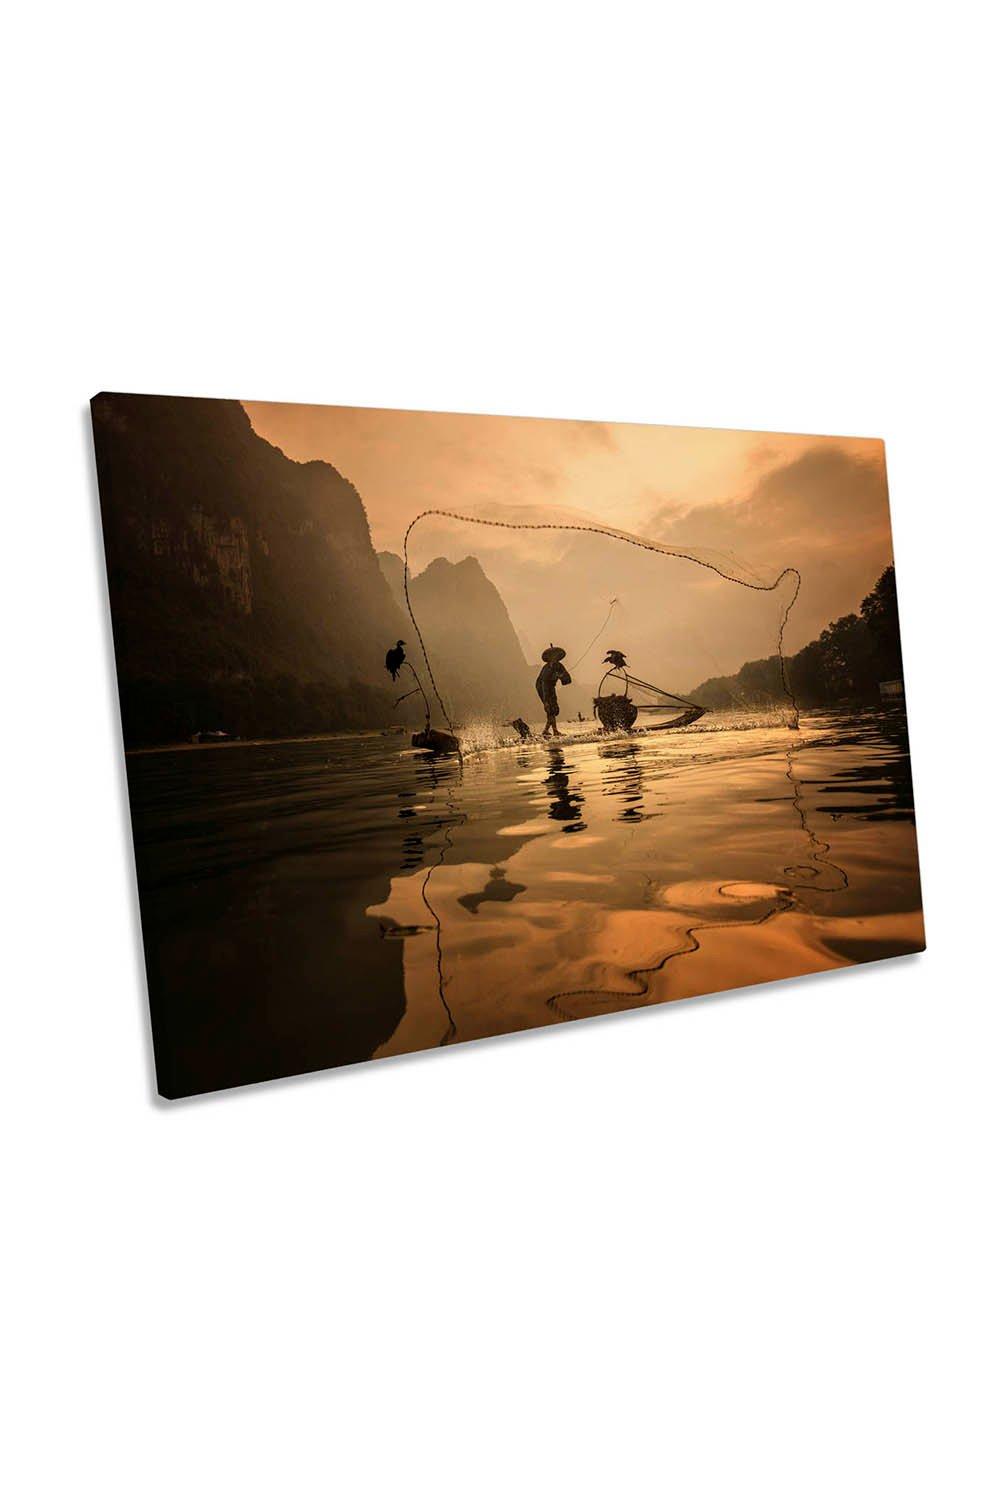 Spread the Fish Nets Sunset Canvas Wall Art Picture Print